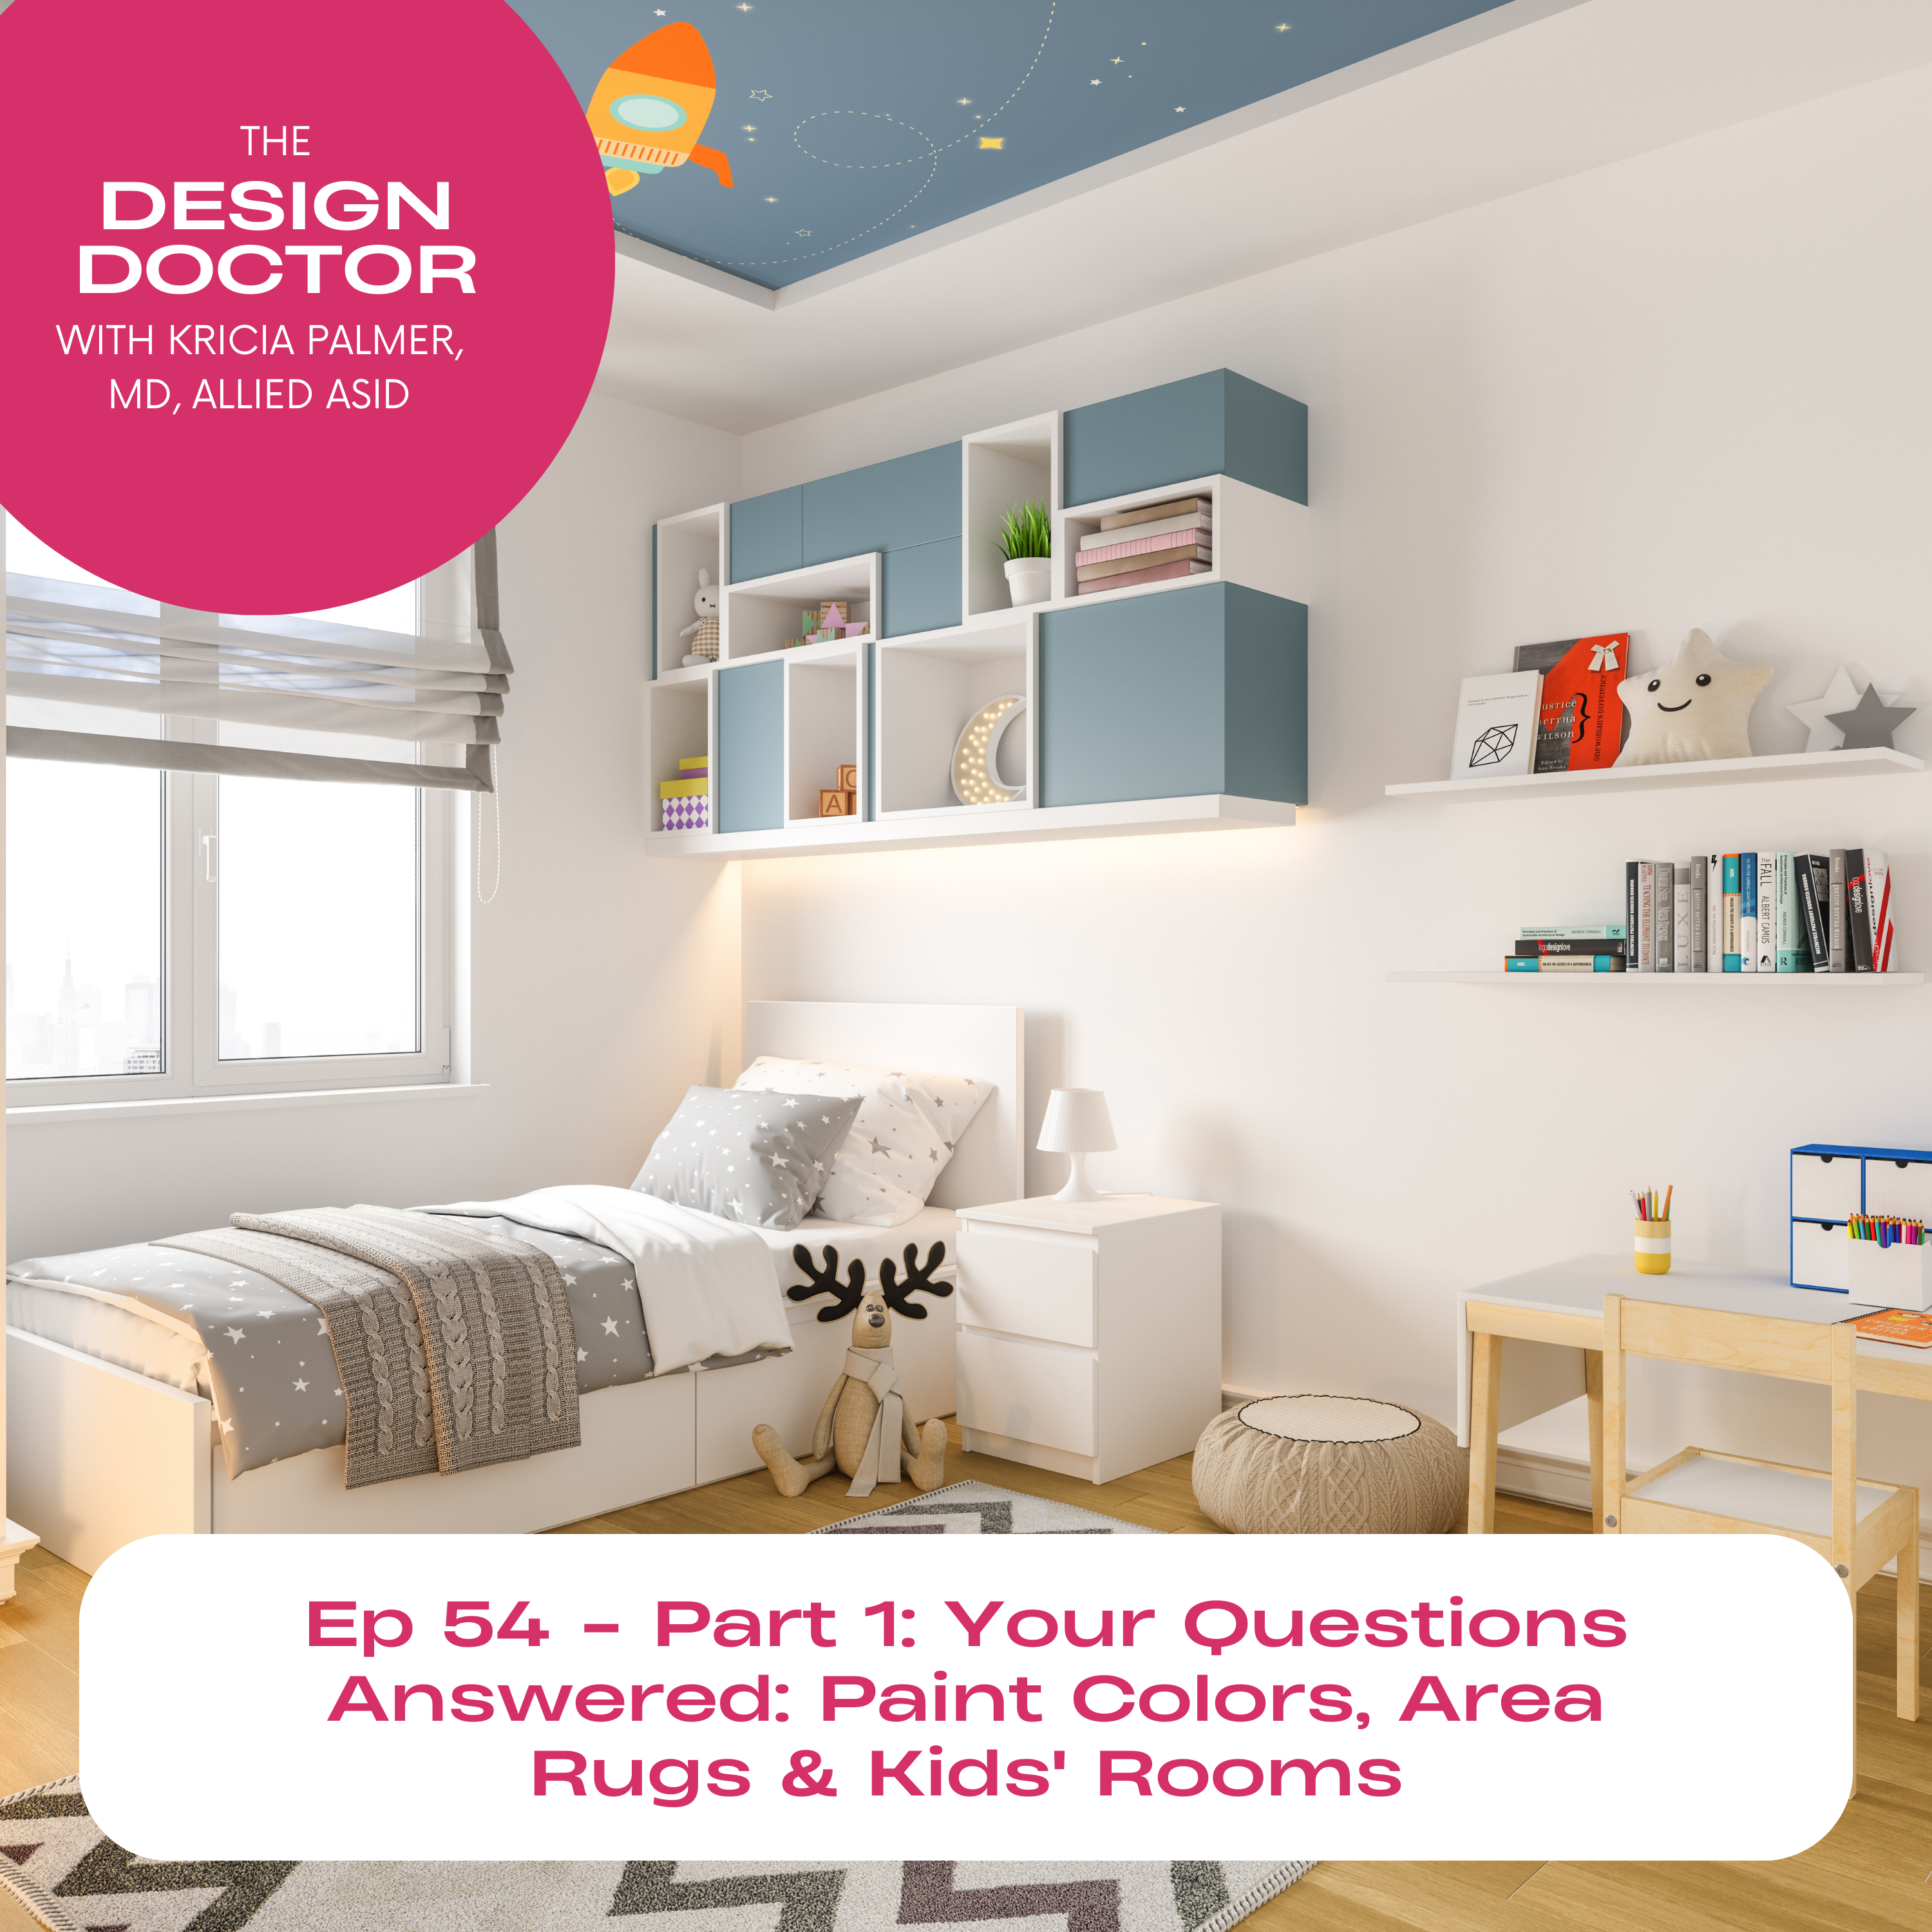 Episode 54 Part 1 Your Questions Answered Paint Colors, Area Rugs & Kids' Rooms